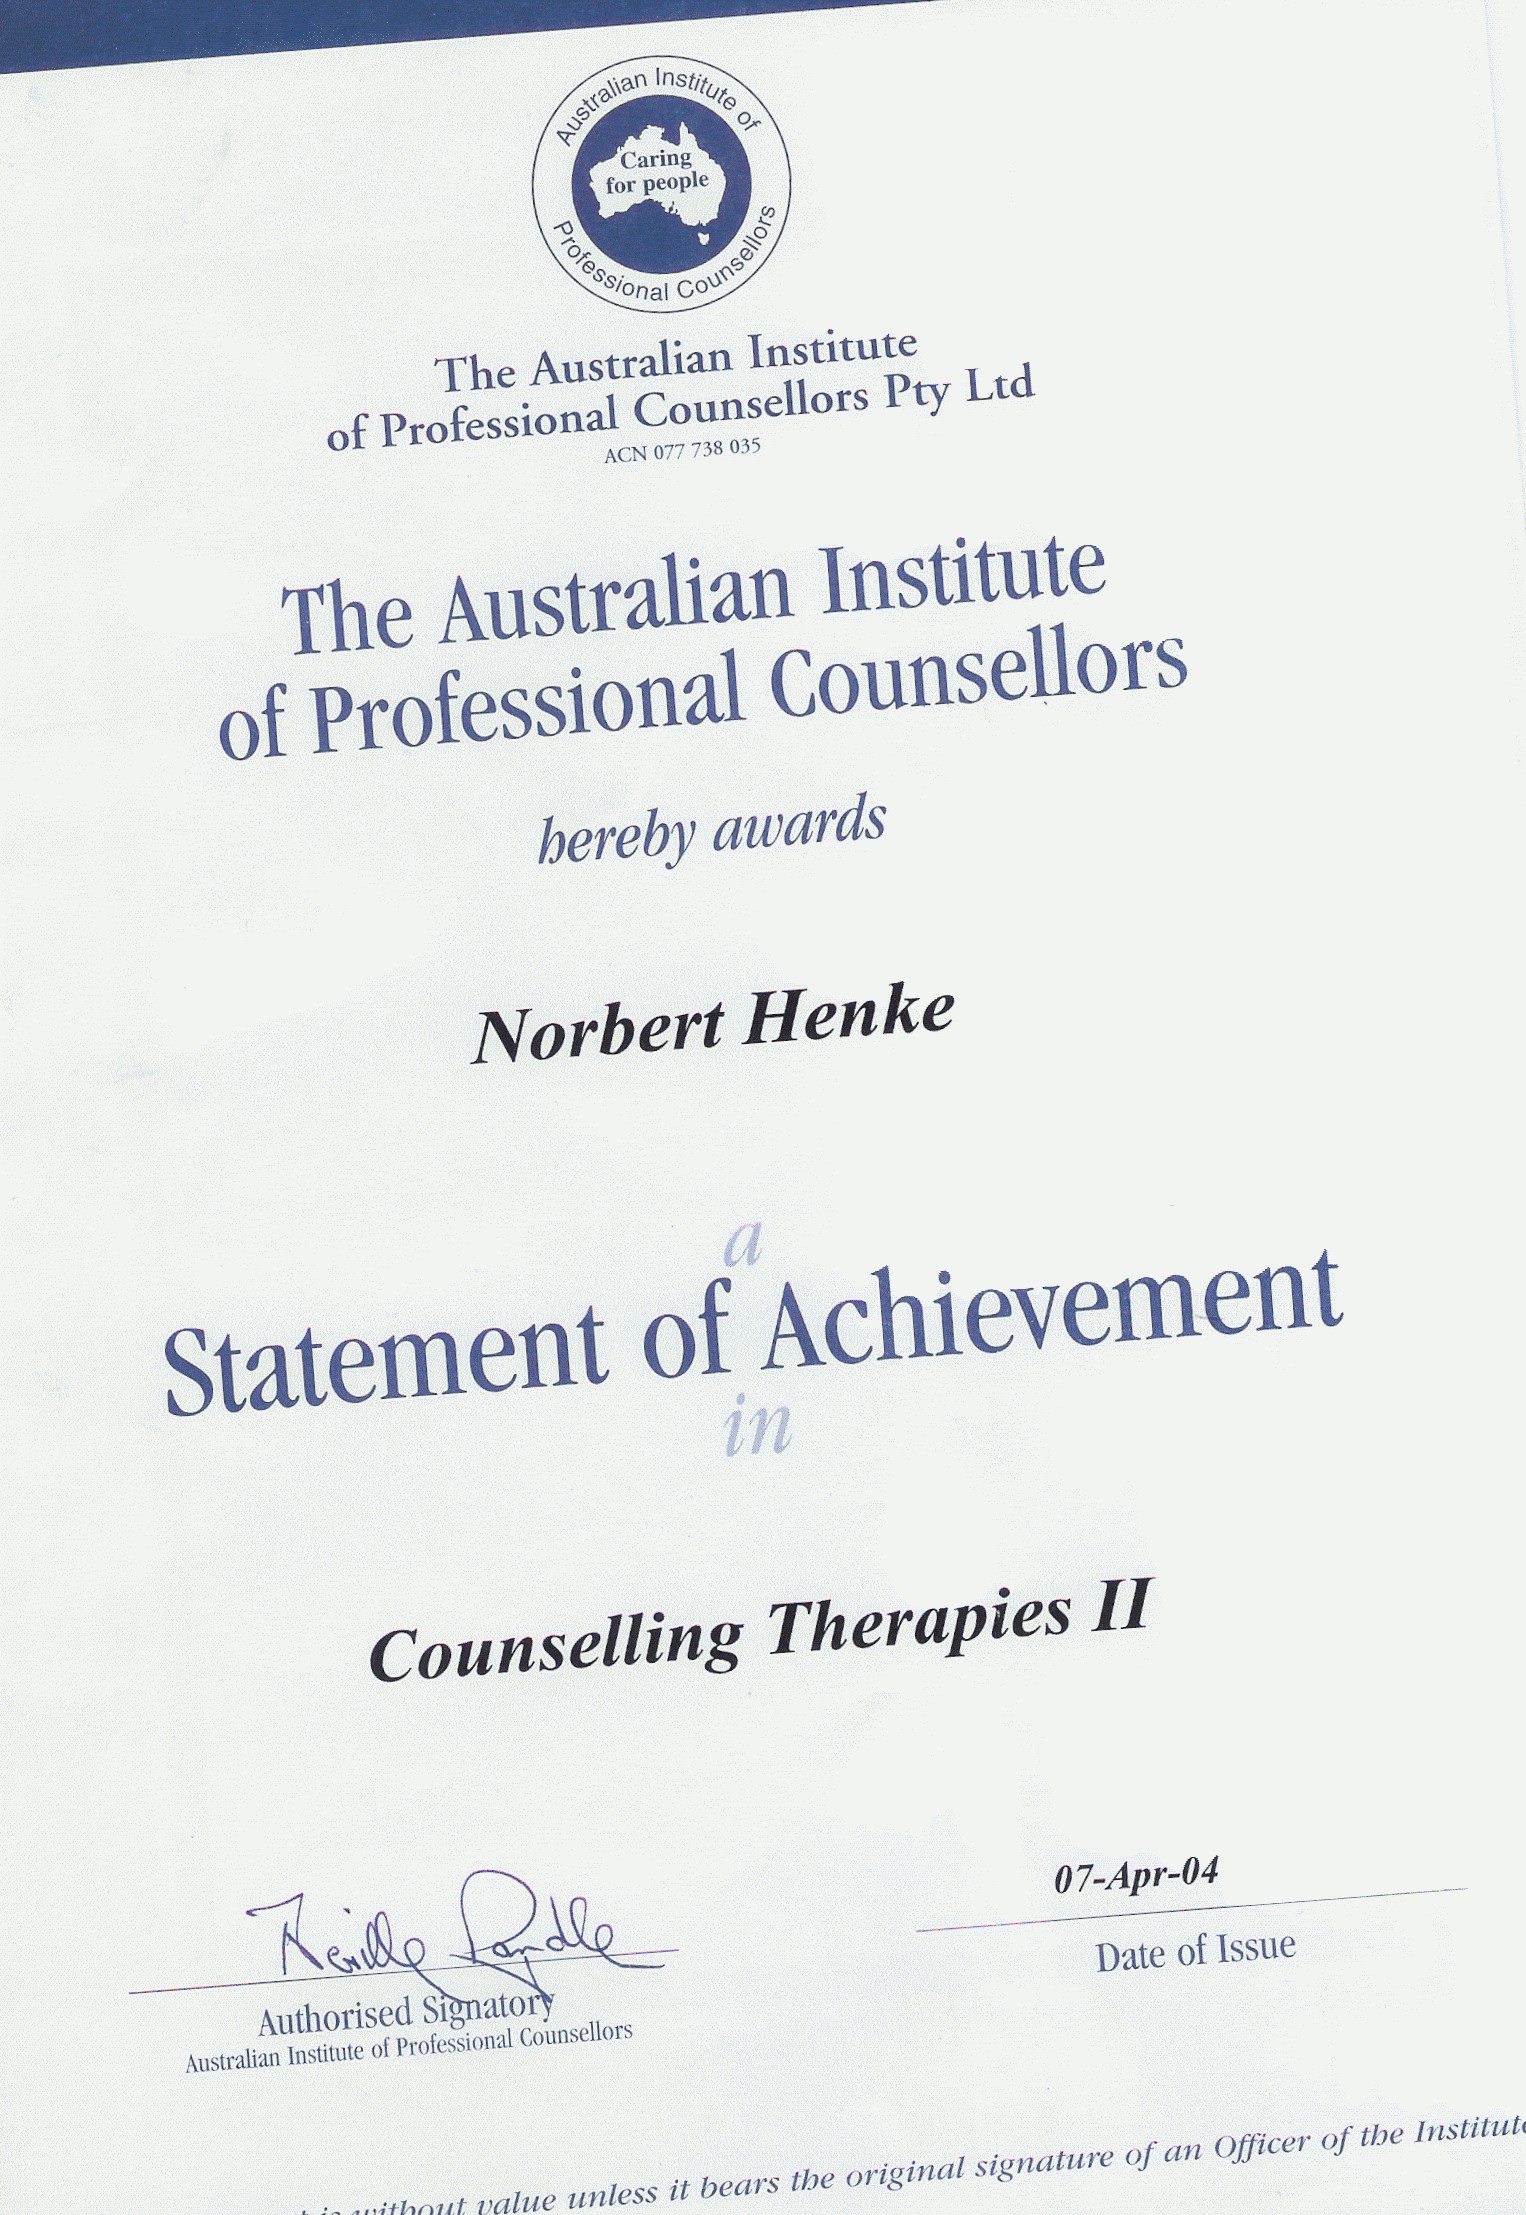 Counselling Therapies 2